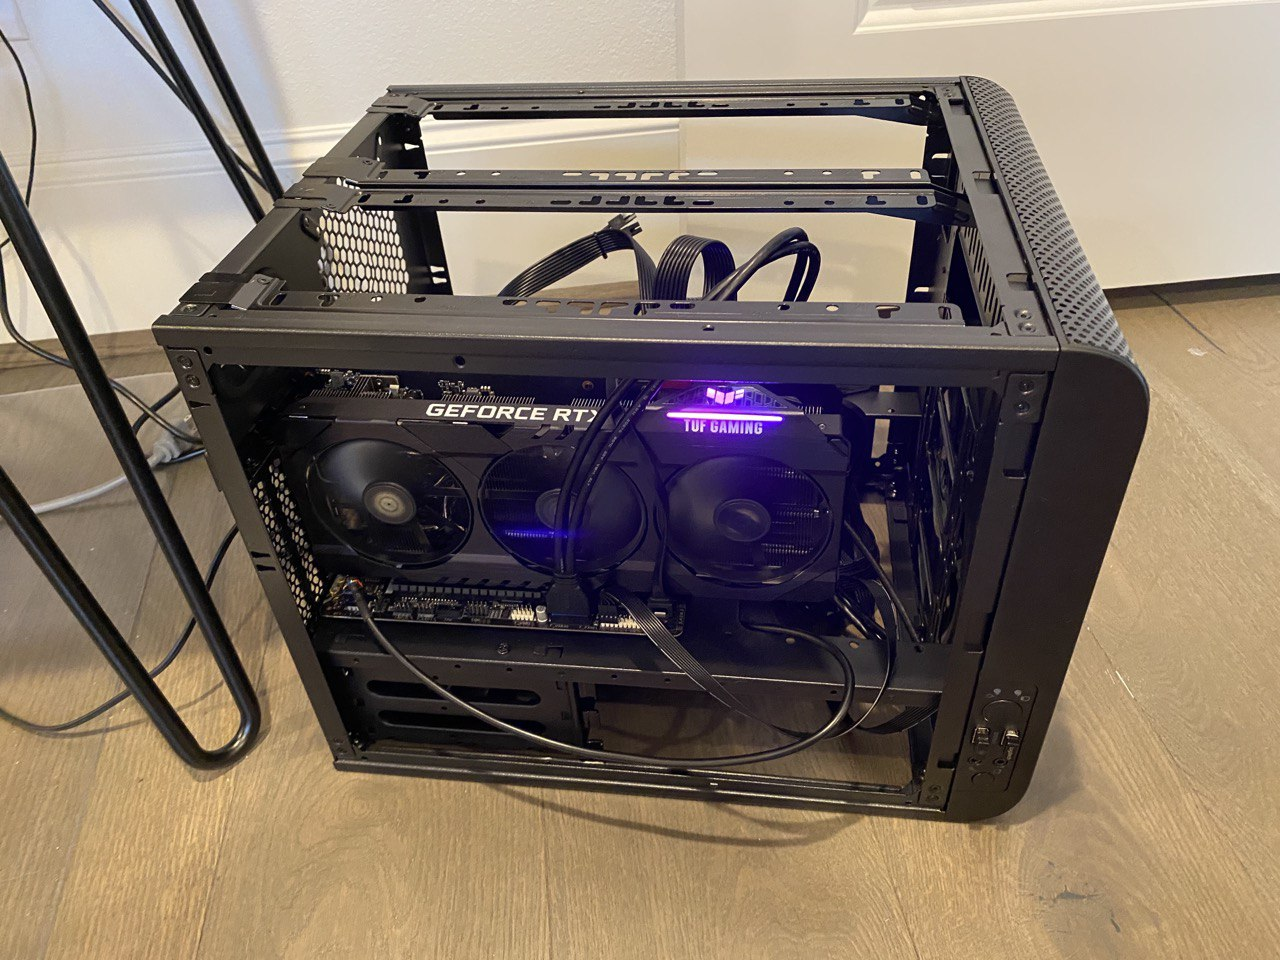 Crypto Mining Rig Update 1 Detailing The Purchase And Building Of By Miguel Saldana Coinmonks Medium